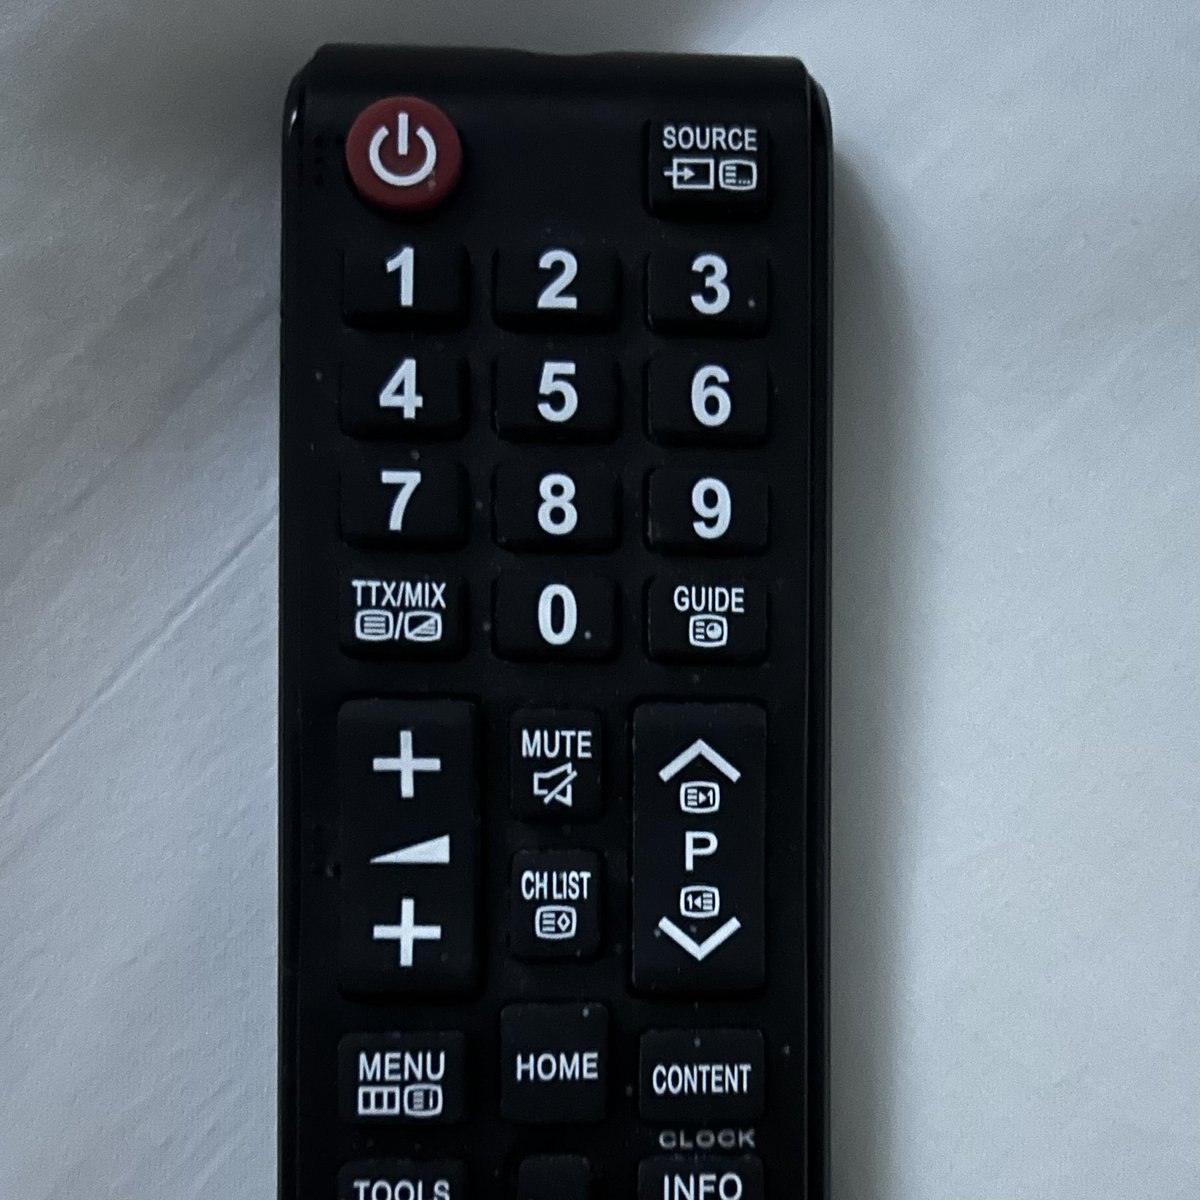 My day has been ruined by the “volume down” button on this remote control.